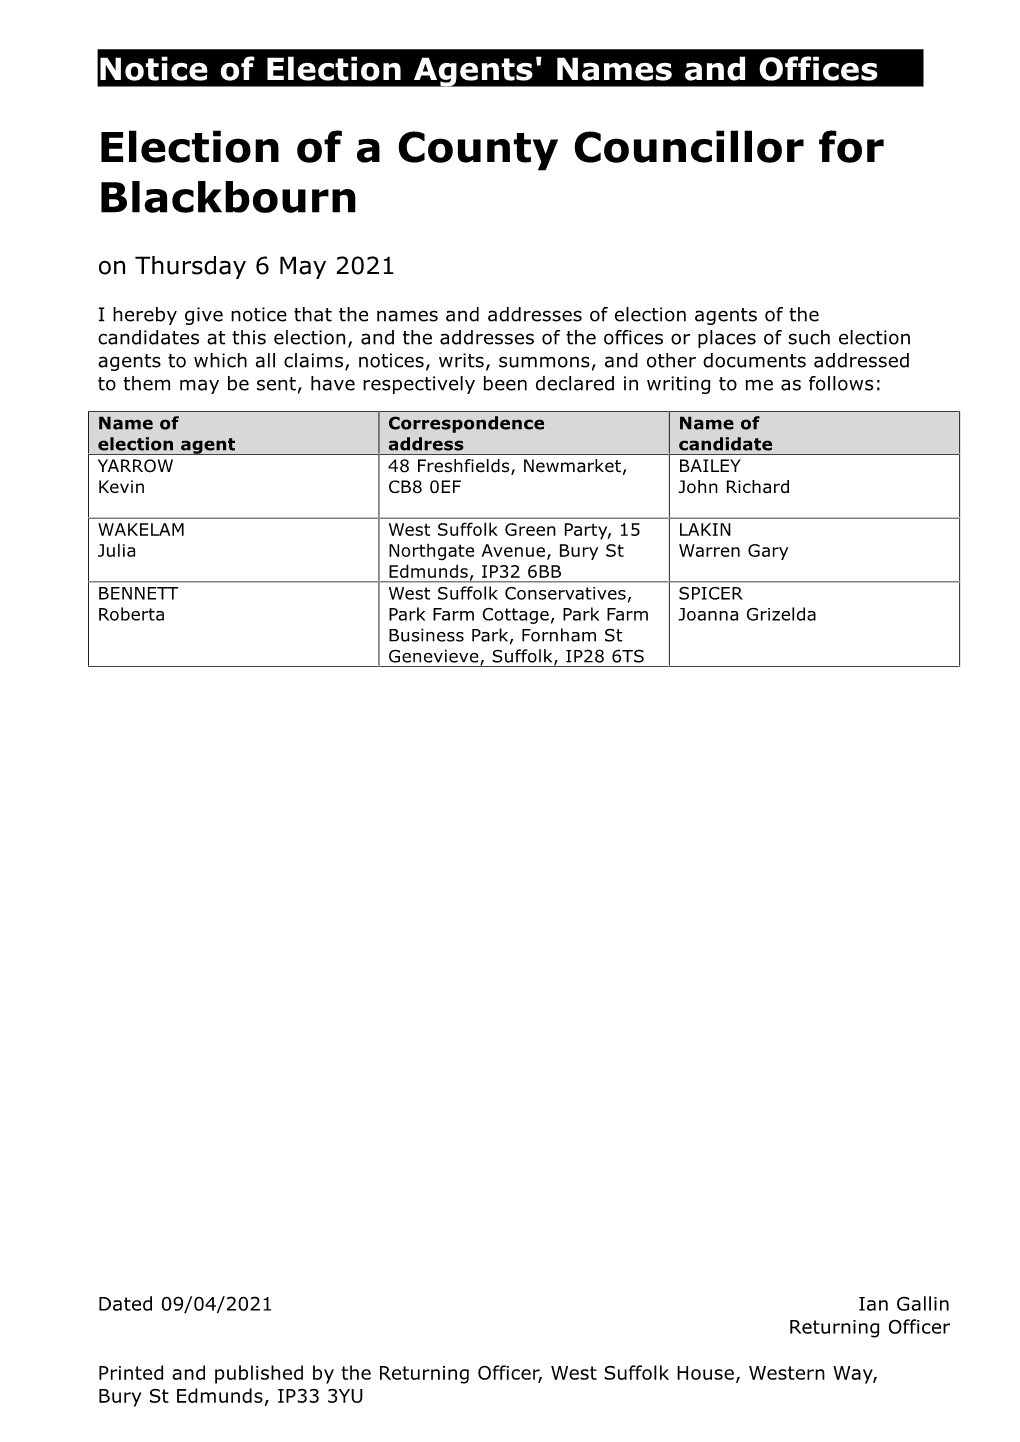 Election of a County Councillor for Blackbourn on Thursday 6 May 2021